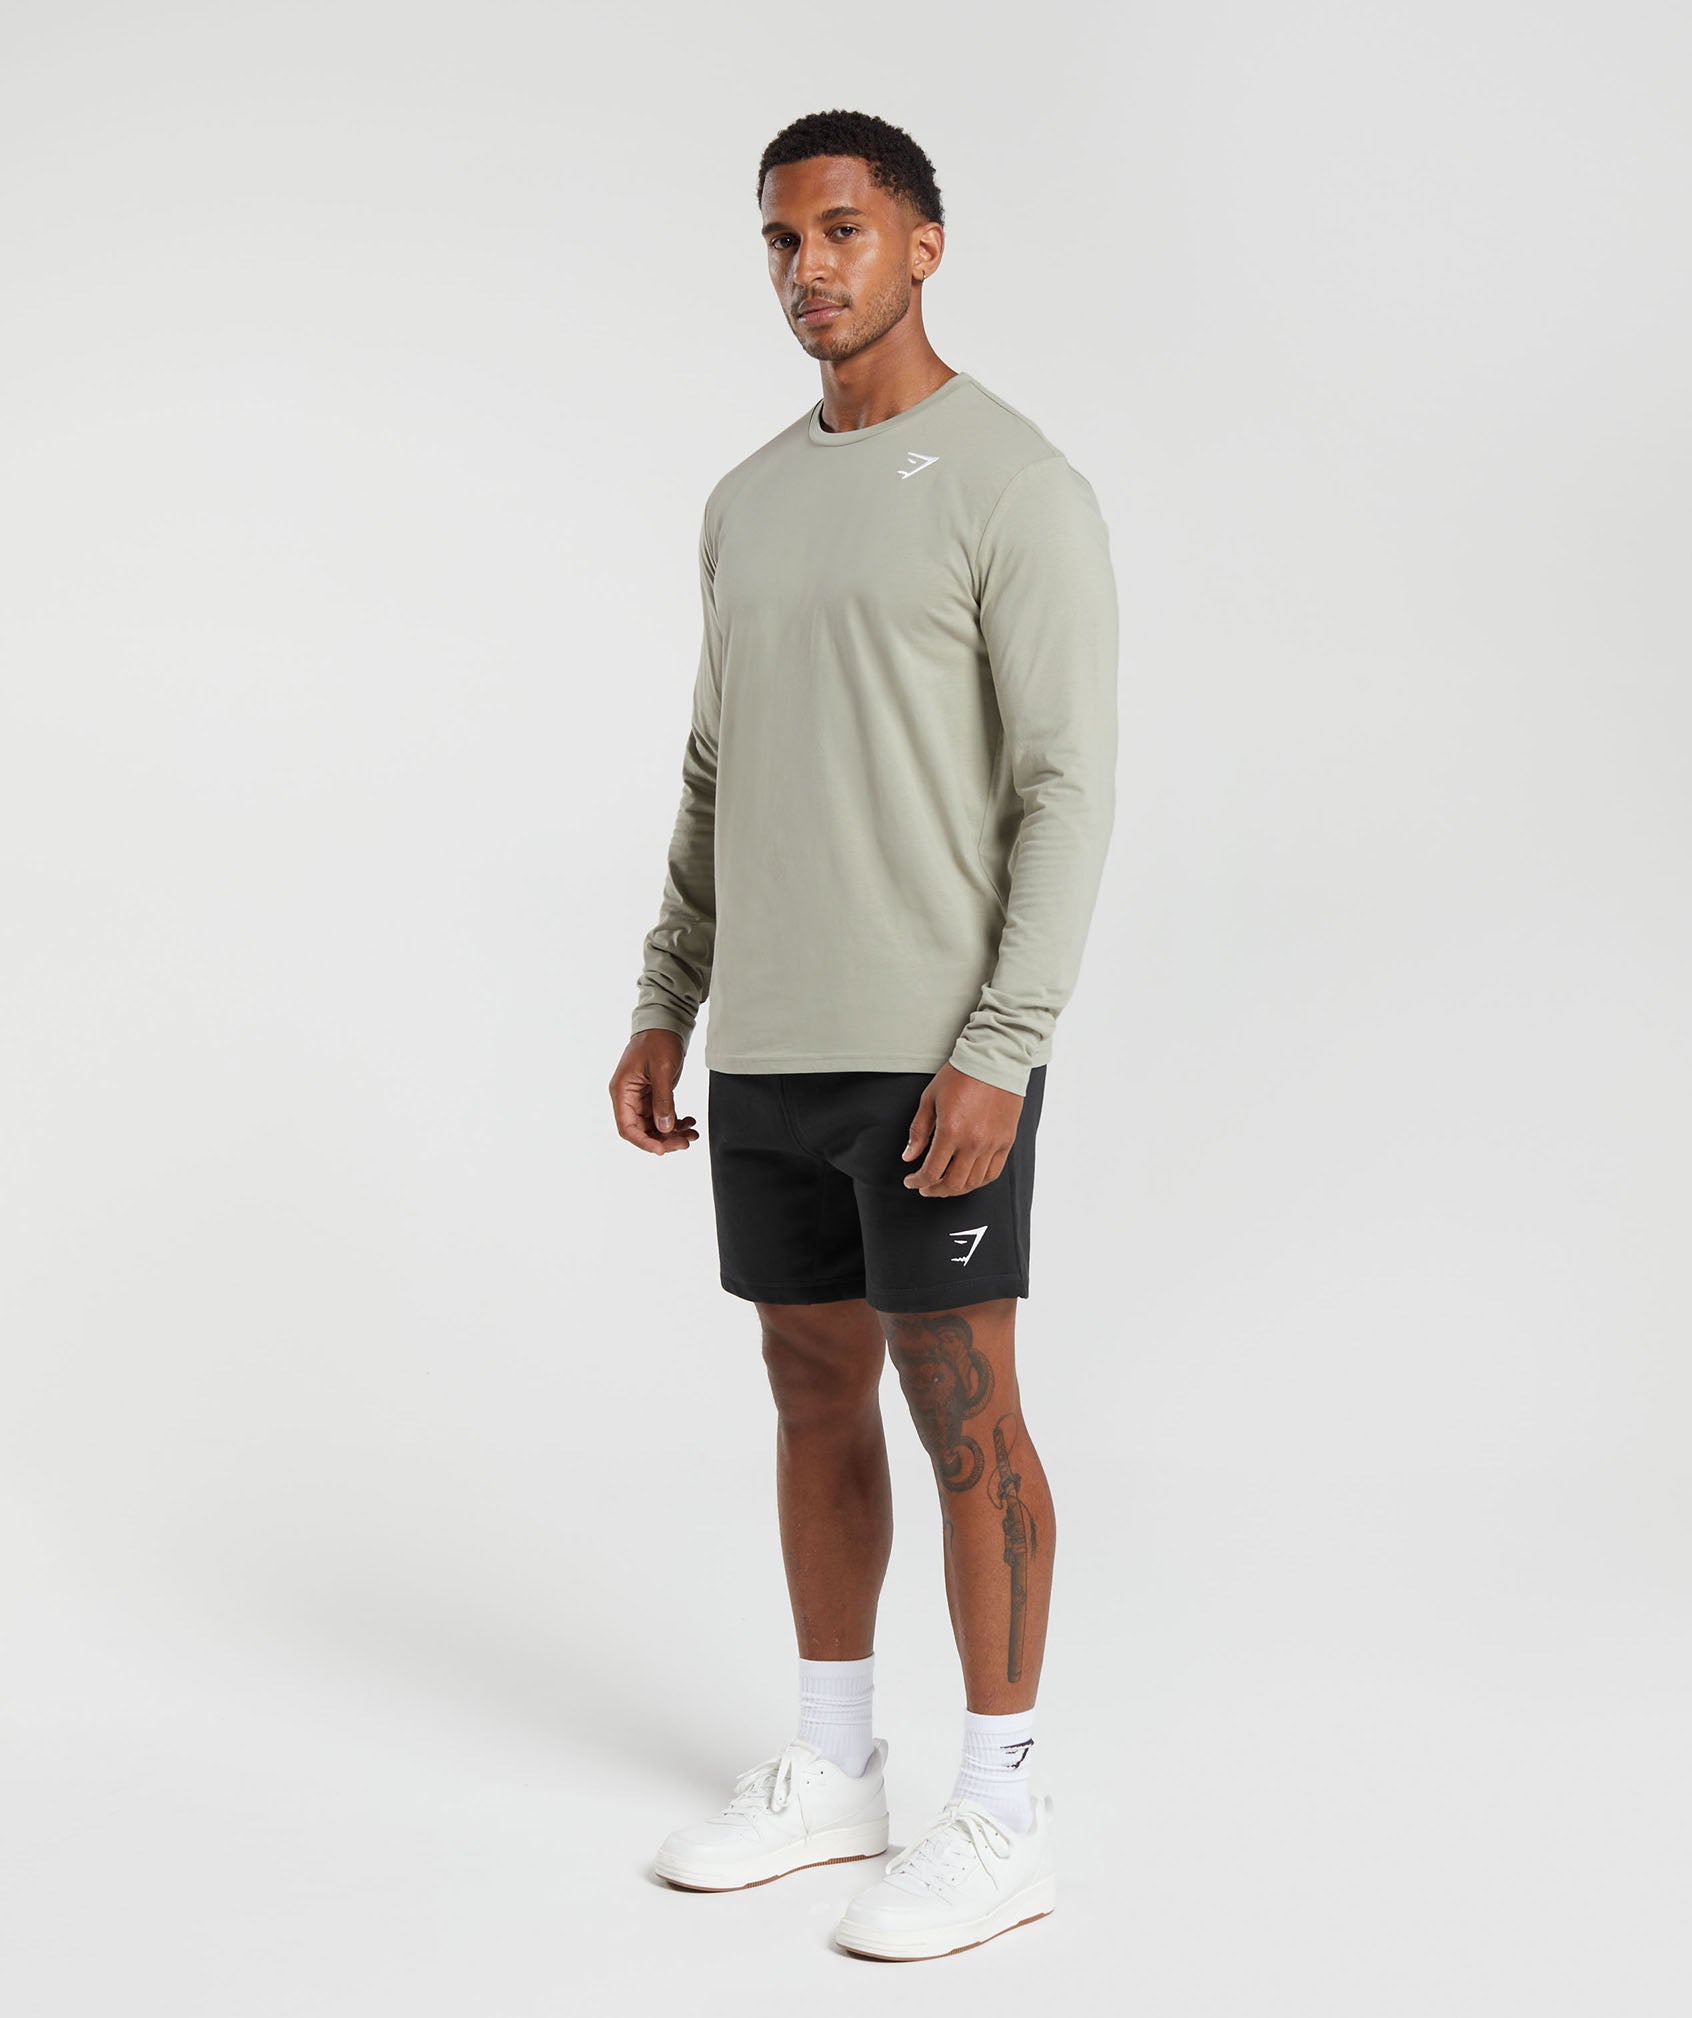 Crest Long Sleeve T-Shirt in Stone Grey - view 4